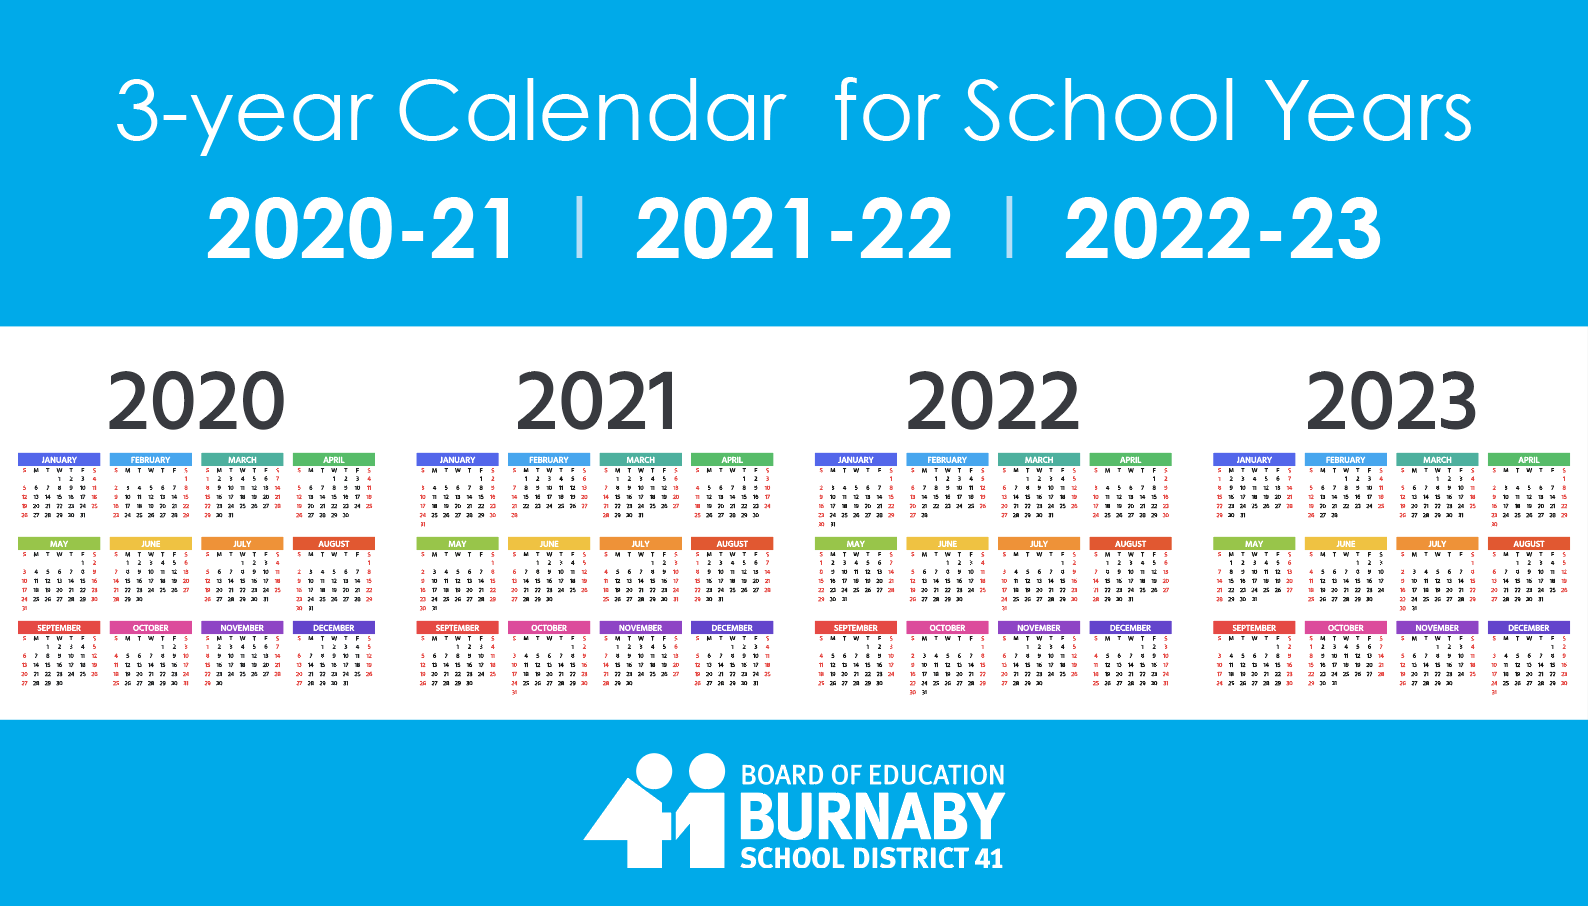 3-yearcalendar 2019-12-02 At 1.12.44 Pm - Burnaby Schools